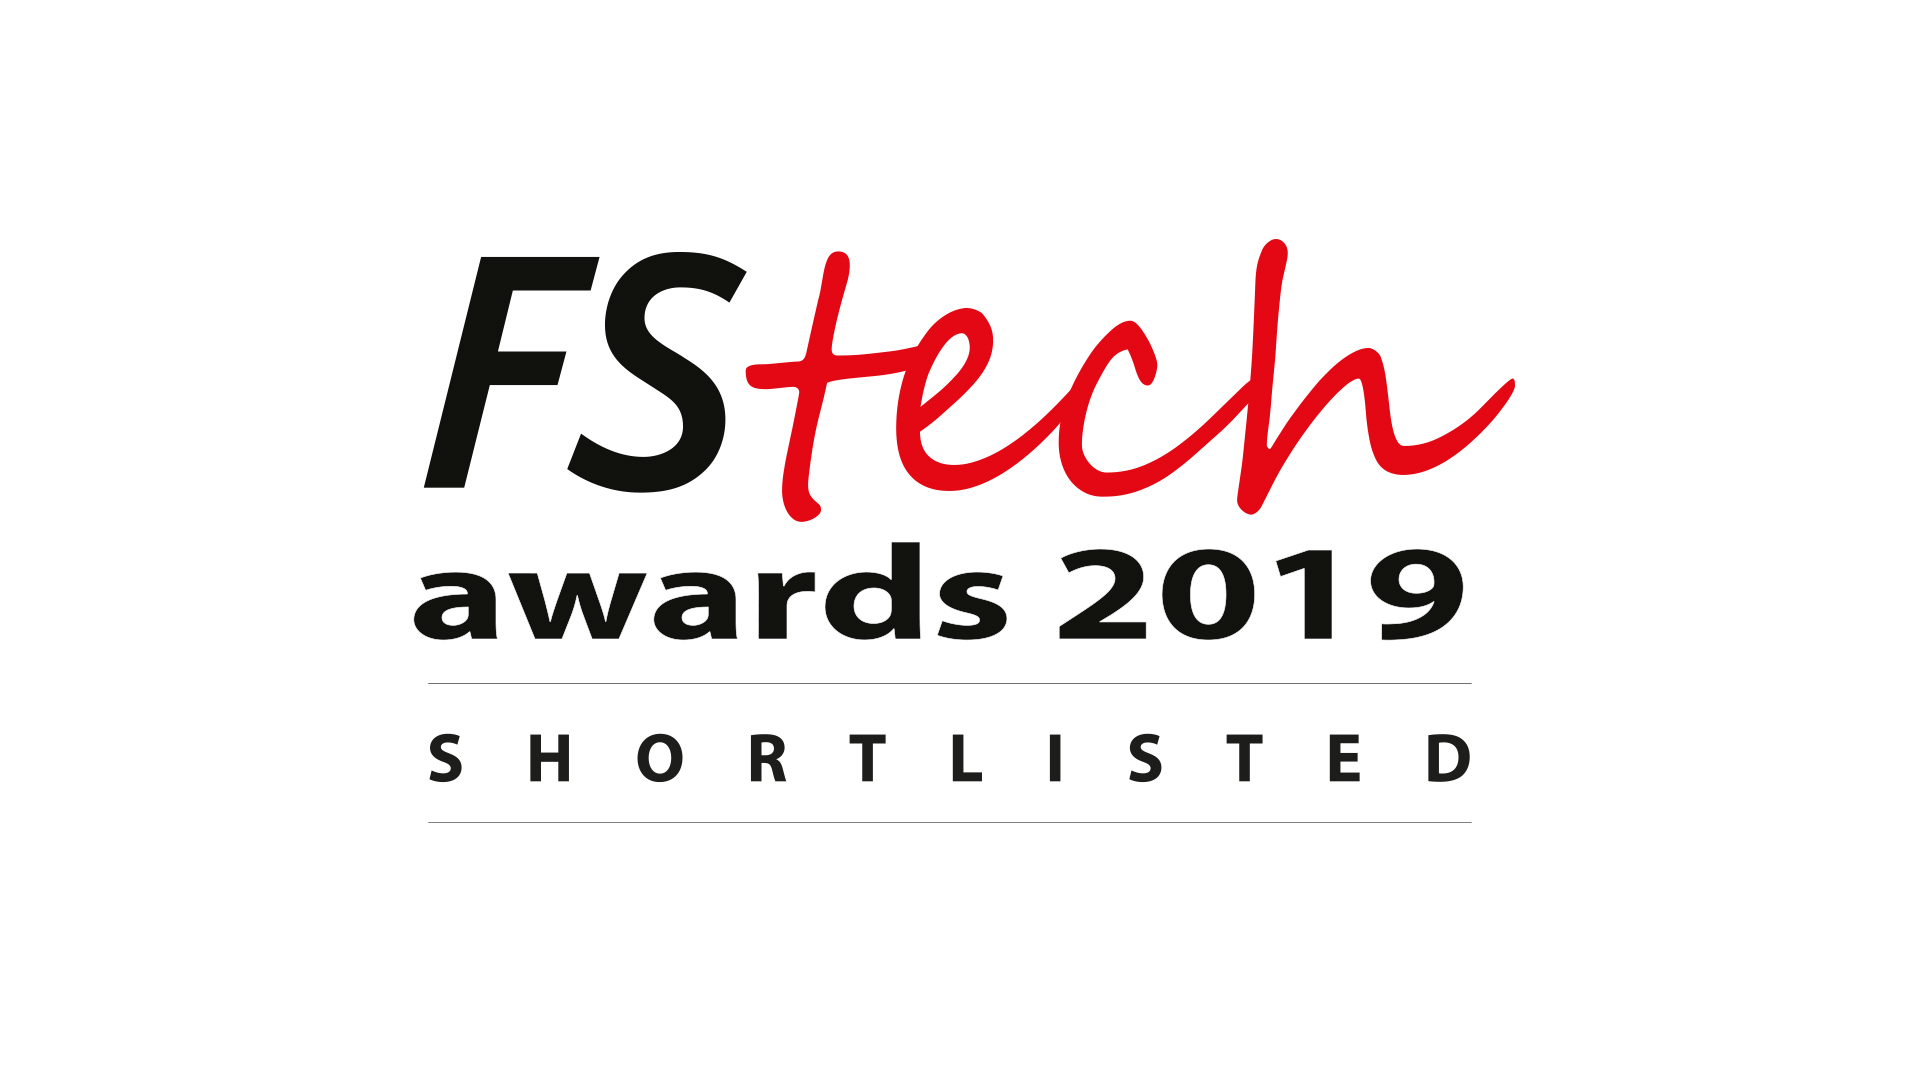 Inbotiqa nominated for FStech Award 2019 - Intelligent Business Email in Best Data & Analytics category